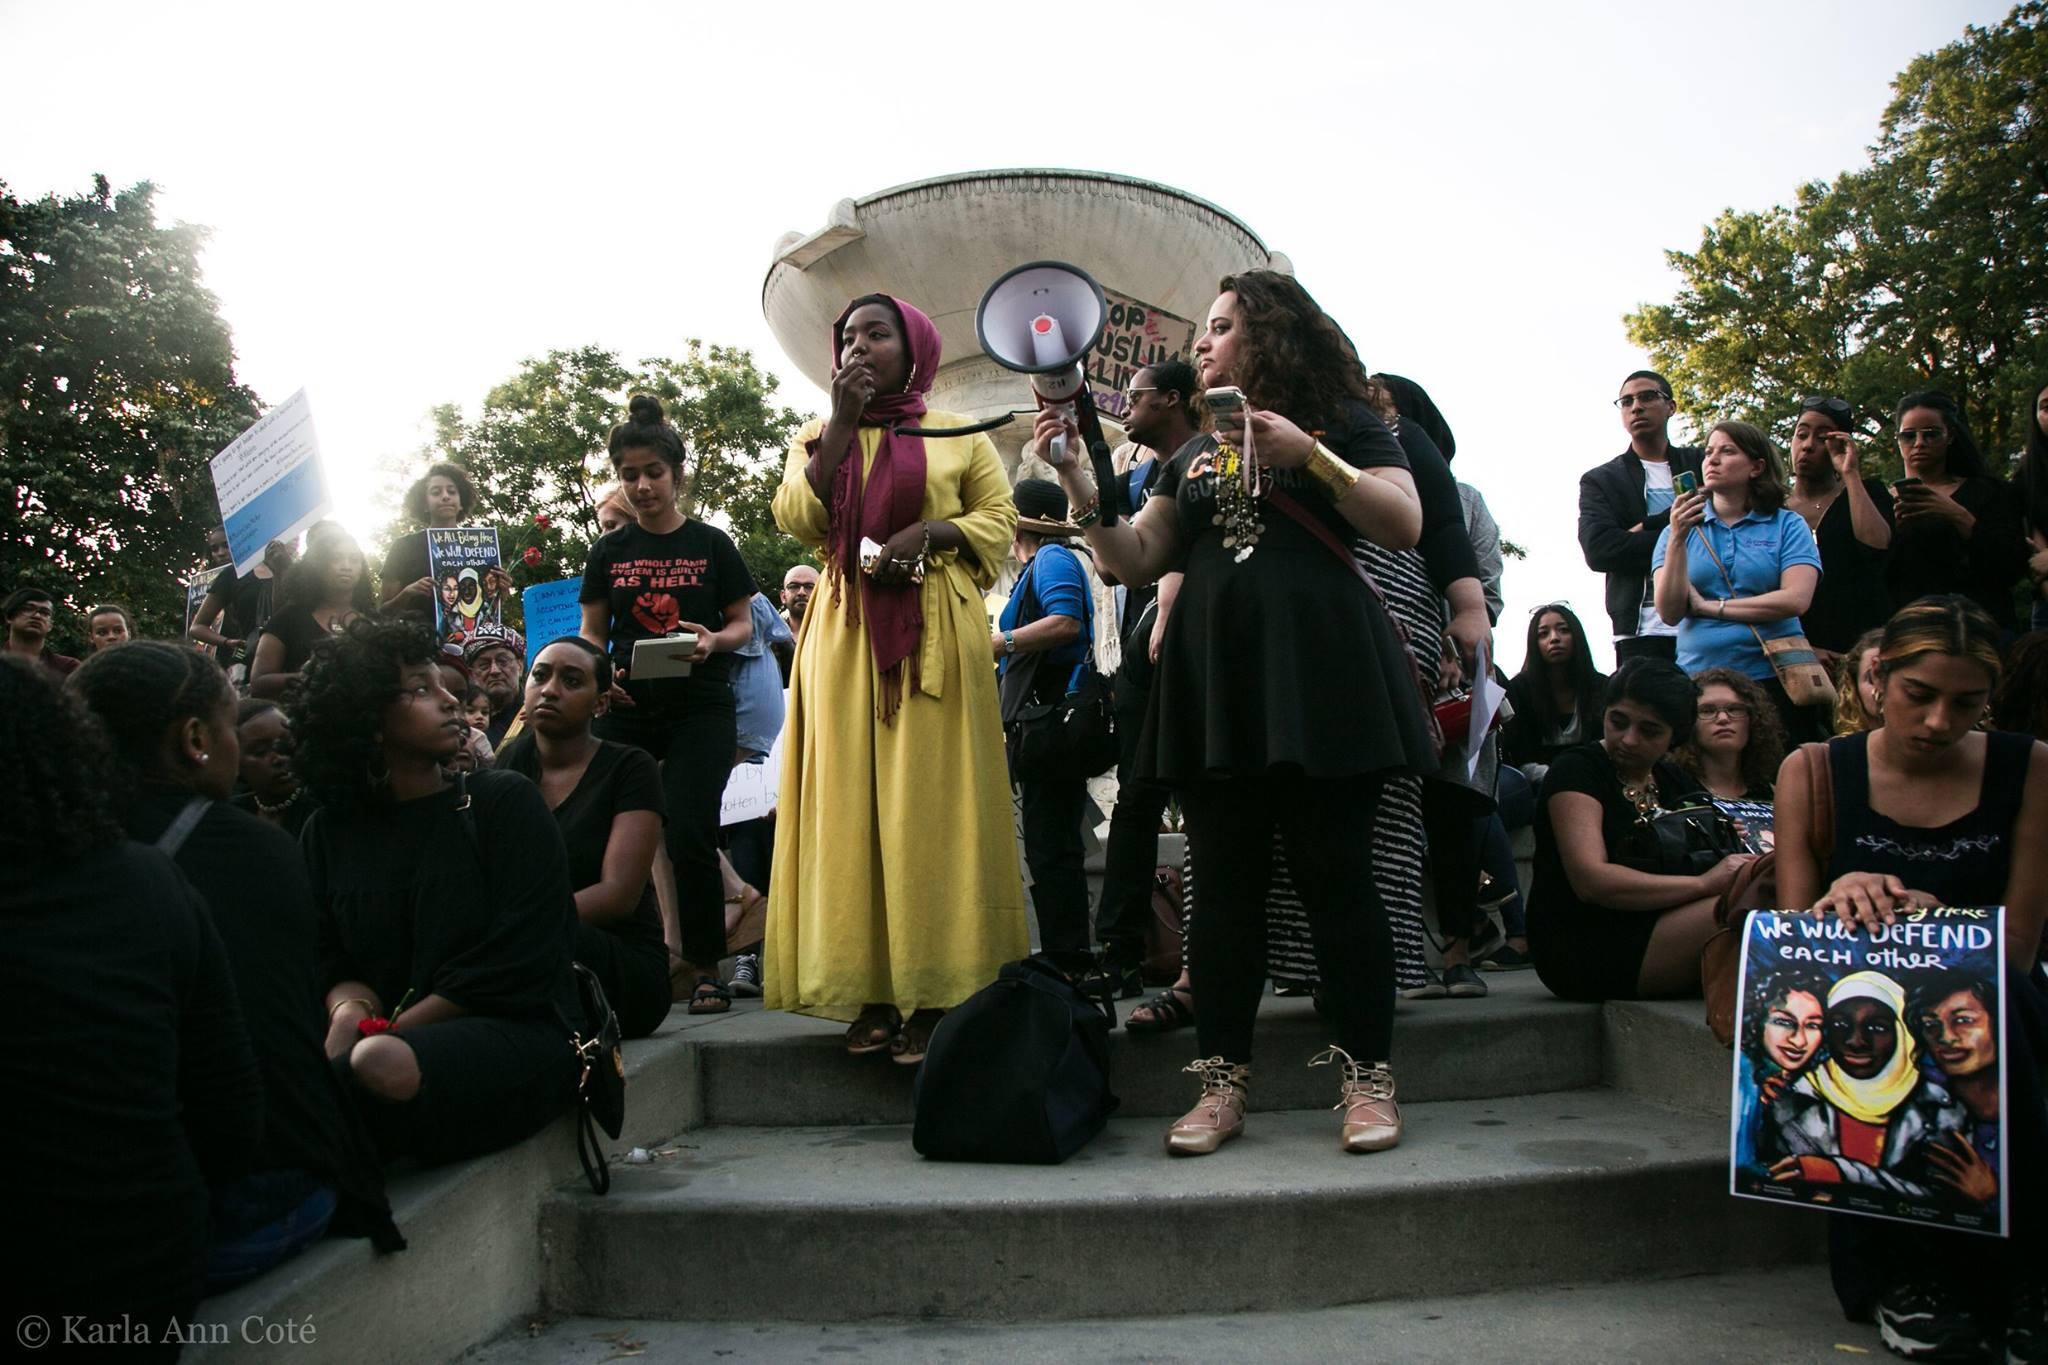 More than 300 people gathered at a memorial for murdered teen Nabra Hassanen